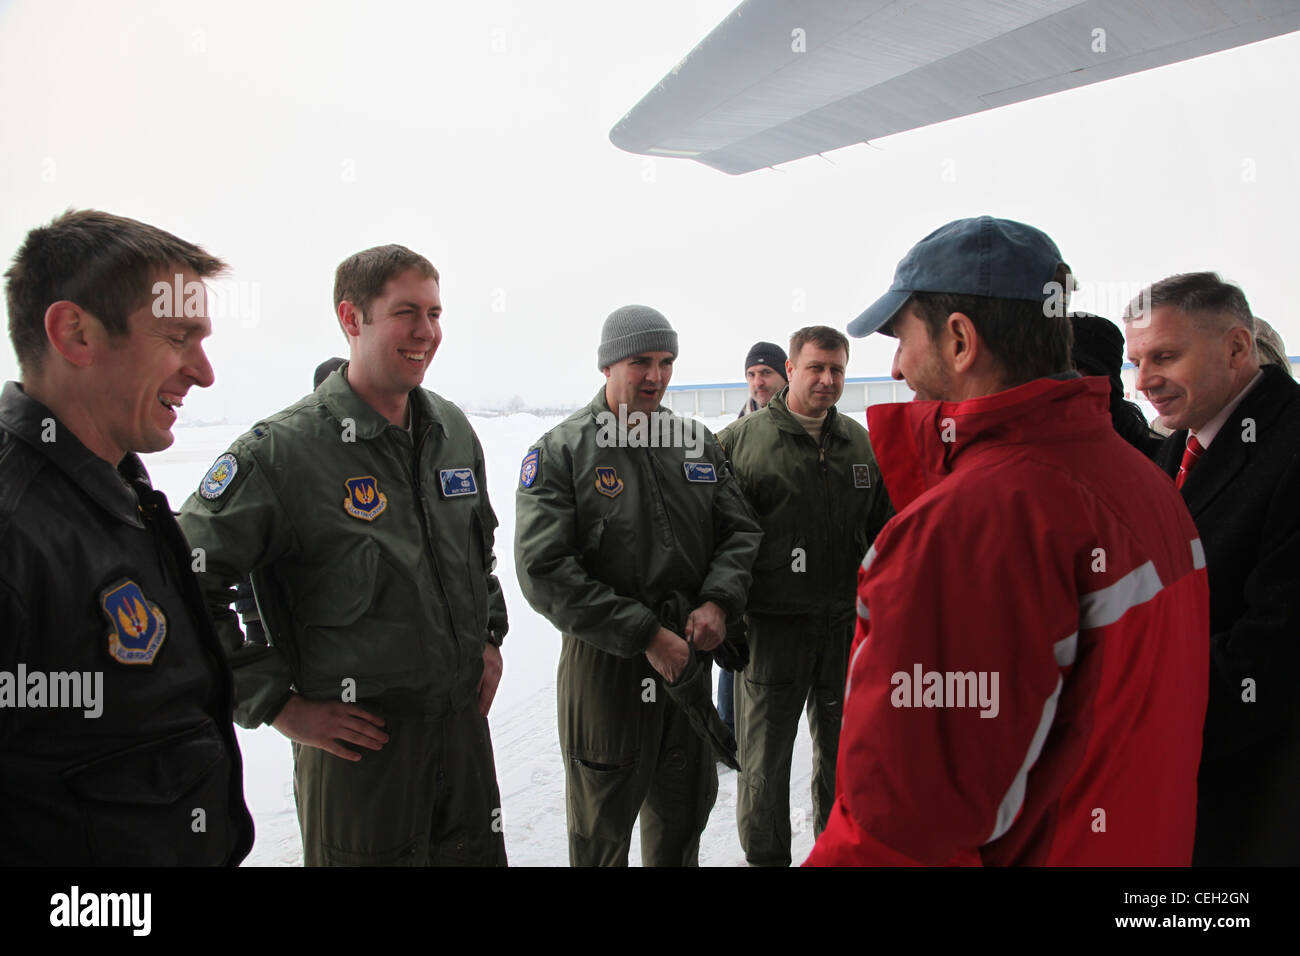 U.S Ambassador to Bosnia Patrick S. Moon, talks to members of the 87th Airlift Squadron from Ramstein AB, Germany in Sarajevo, Bosnia on Feb. 12, 2012. Thanks and appreciation came after a military-to-military exchange between Bosnia and Herzegovina and U.S. Forces Stock Photo